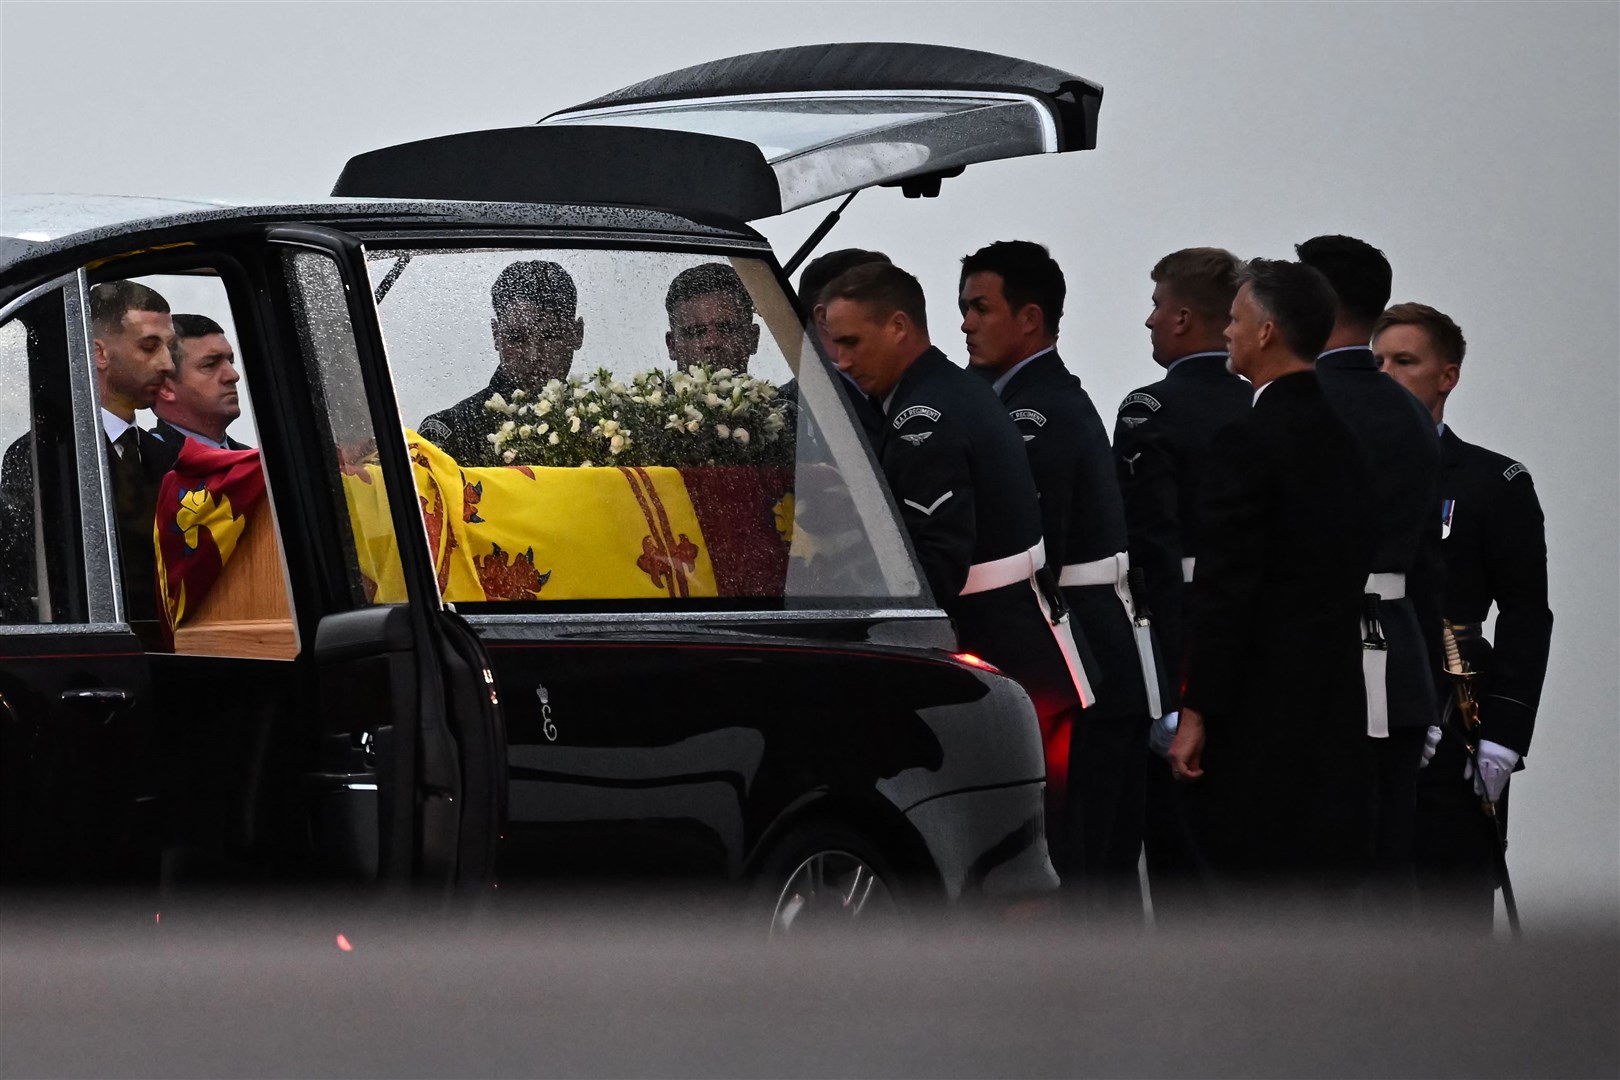 The bearer party from the Queen’s Colour Squadron (63 Squadron RAF Regiment) carry the Queen’s coffin to the waiting hearse at RAF Northolt (Ben Stansall/PA)